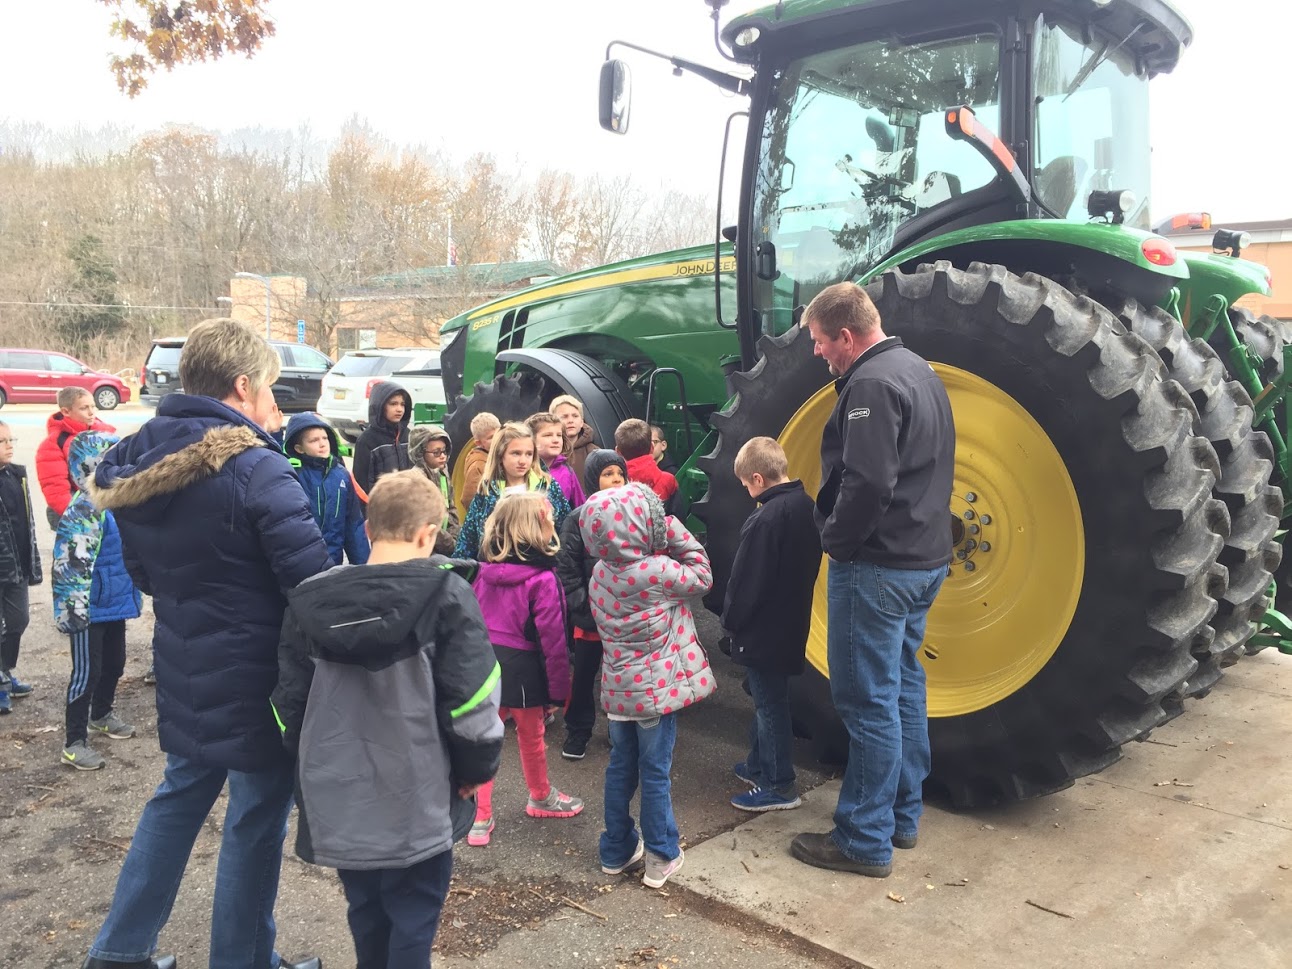 Tractor for Show and Tell!